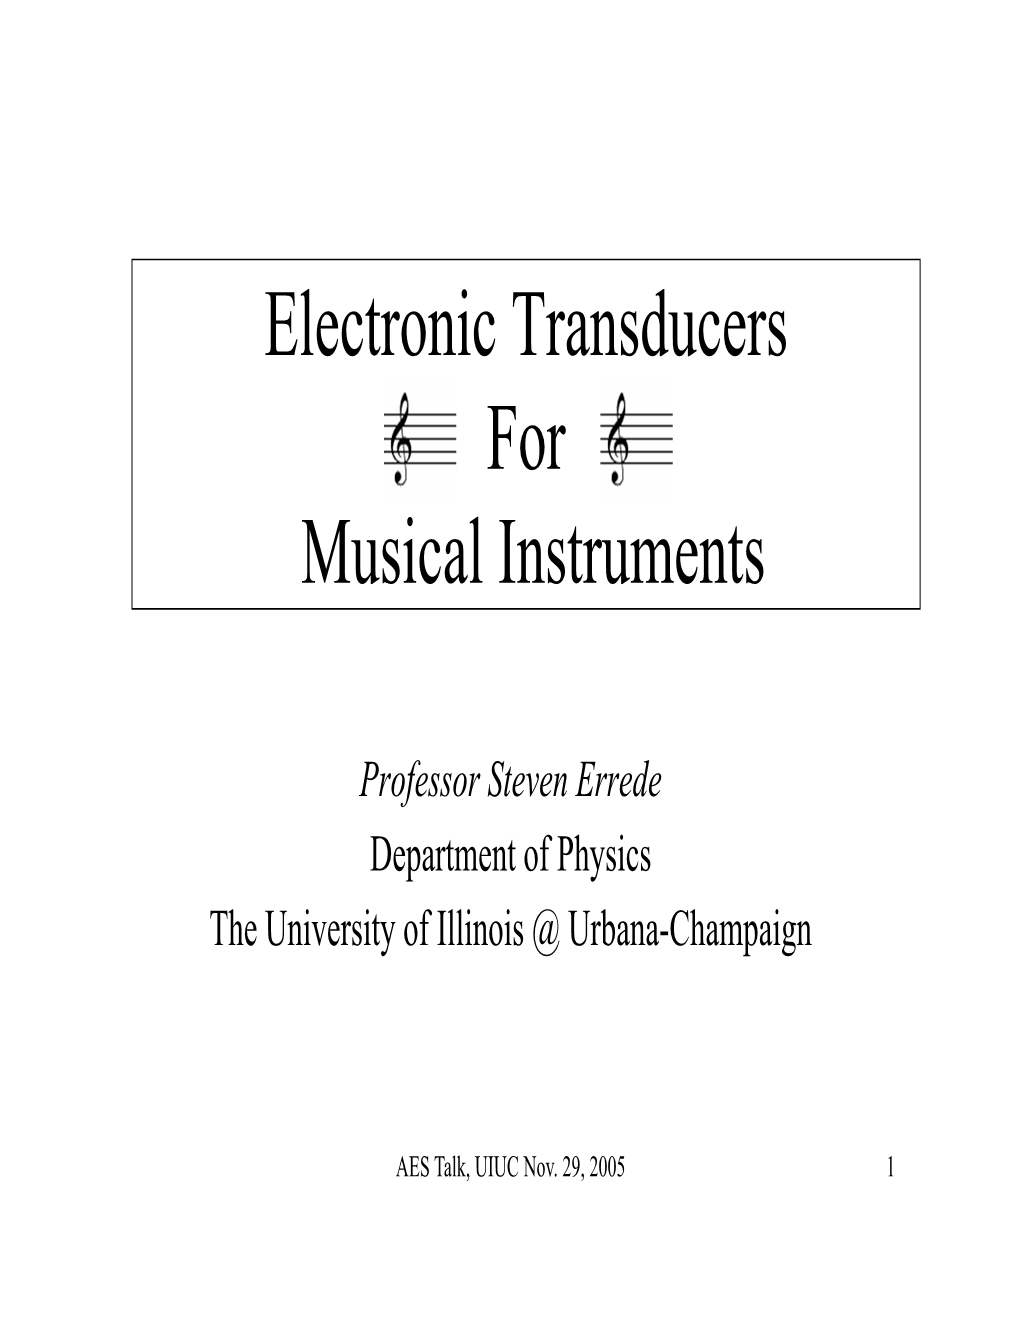 Electronic Transducers for Musical Instruments